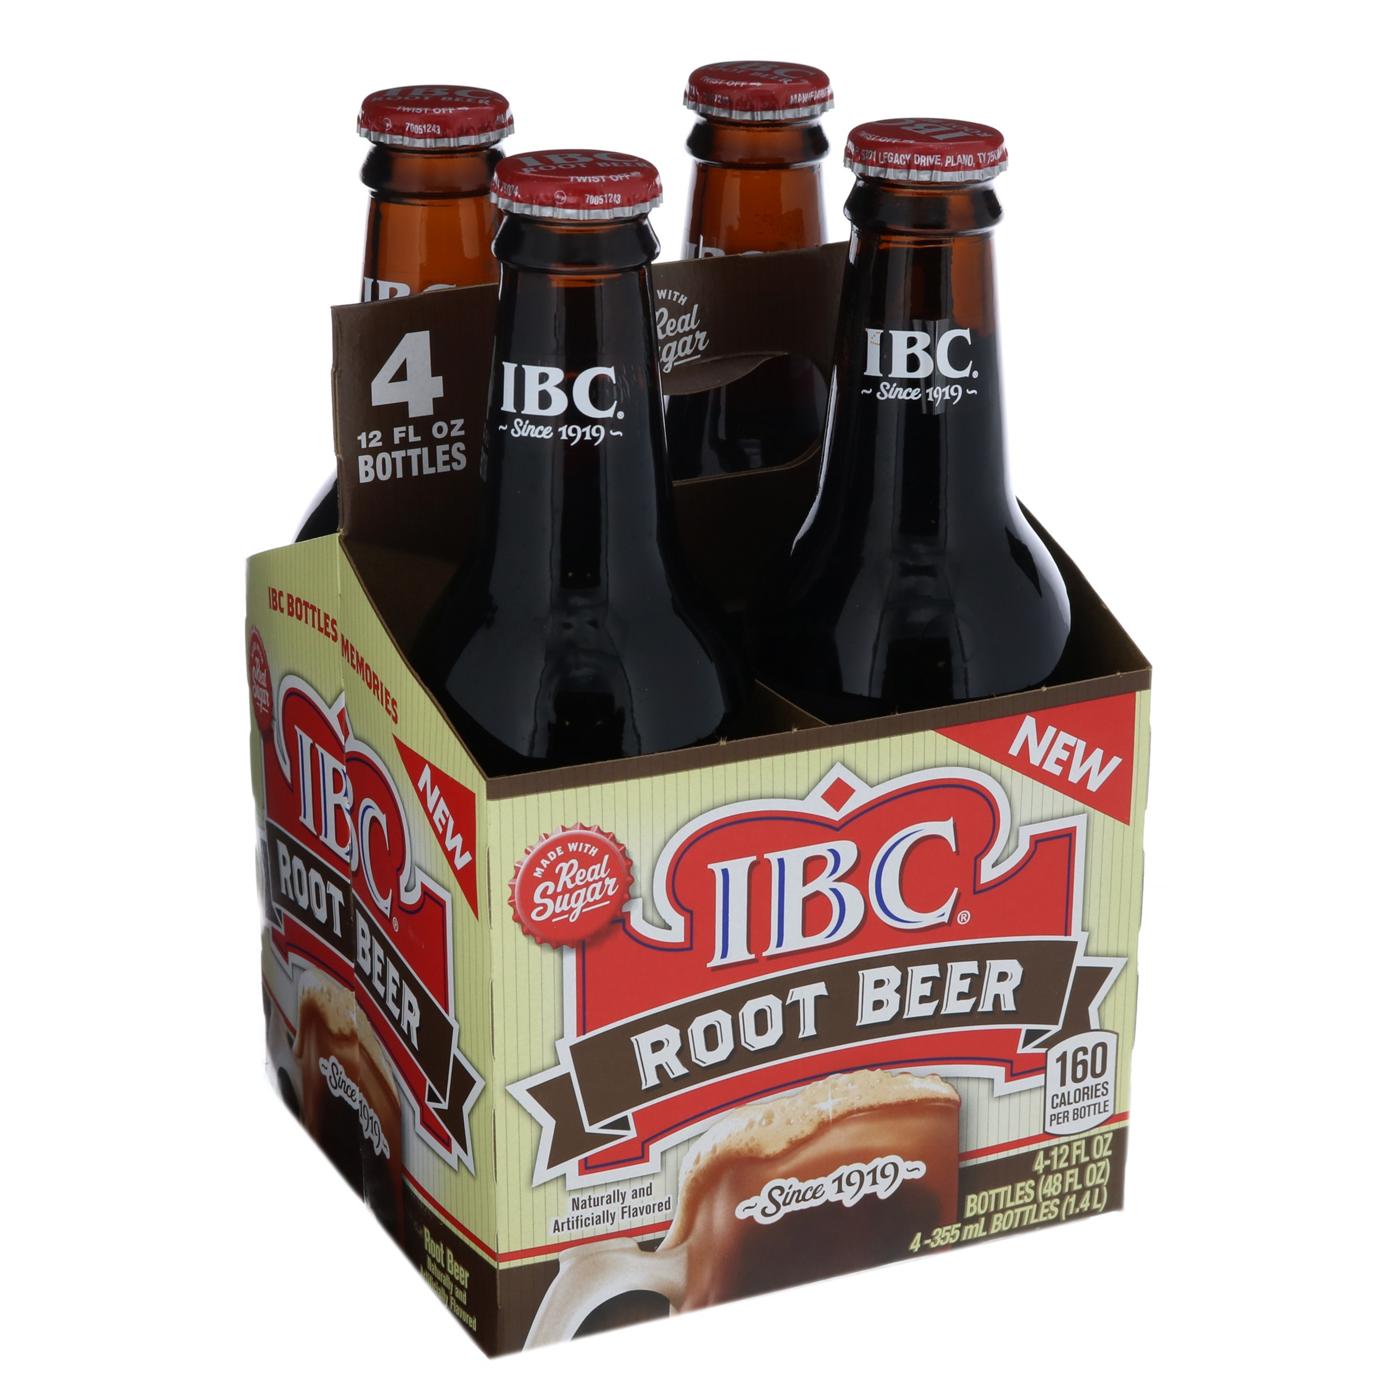 IBC Root Beer; image 1 of 2